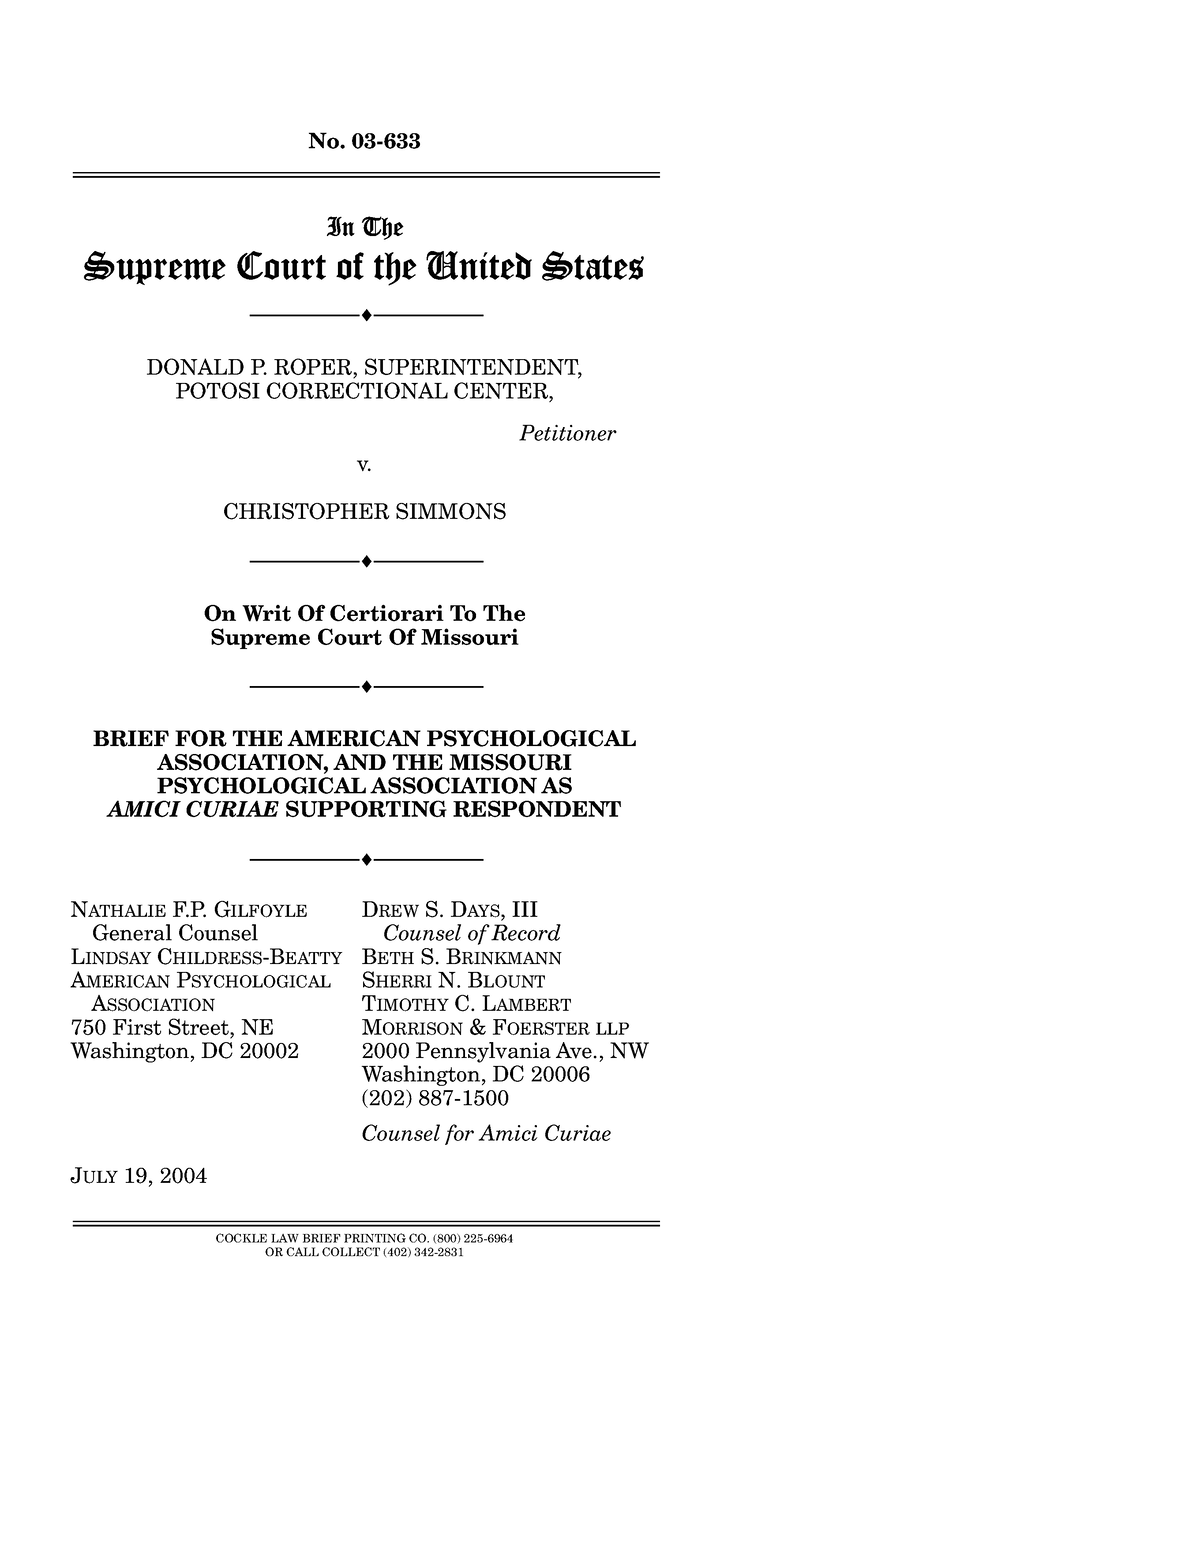 Roper v Simmons Amicus Brief No 03 In The Supreme Court of the